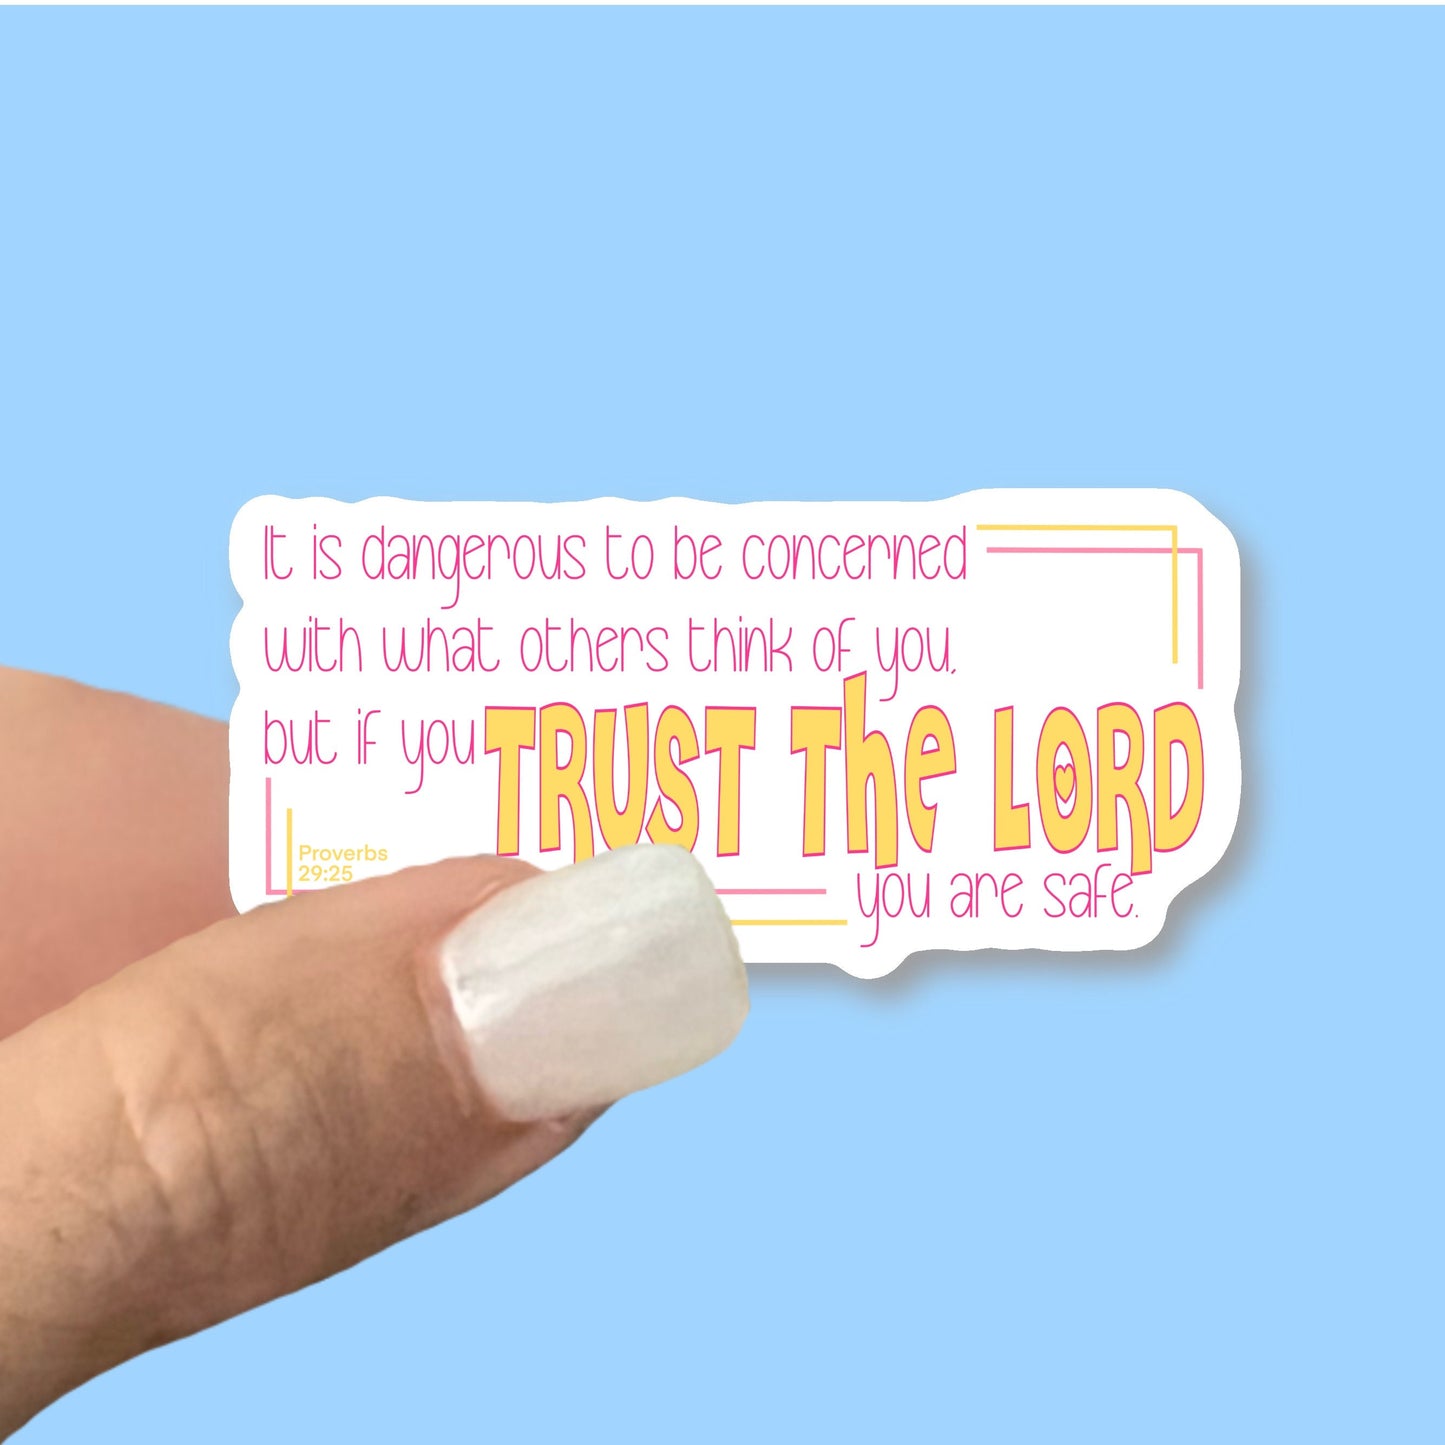 Don't be concerned, Trust the Lord - Christian Faith UV/ Waterproof Vinyl Sticker/ Decal- Choice of Size, Single or Bulk qty